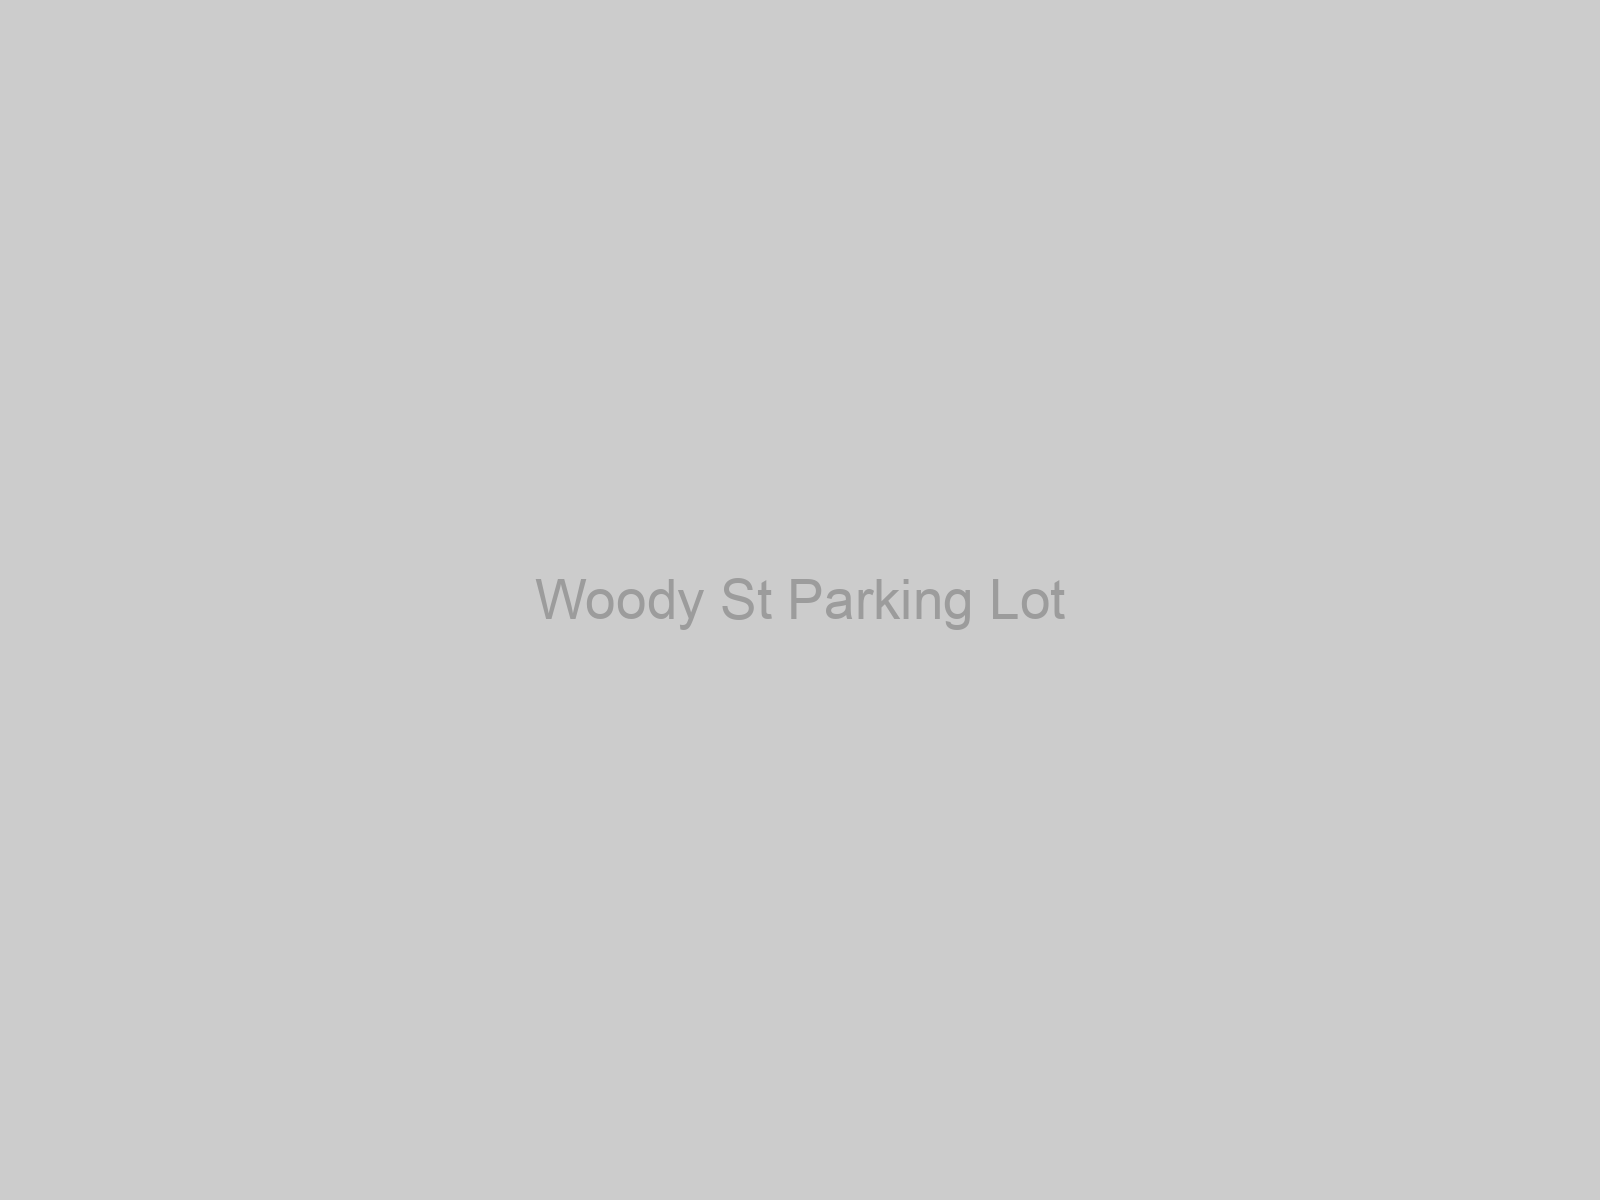 Woody St Parking Lot